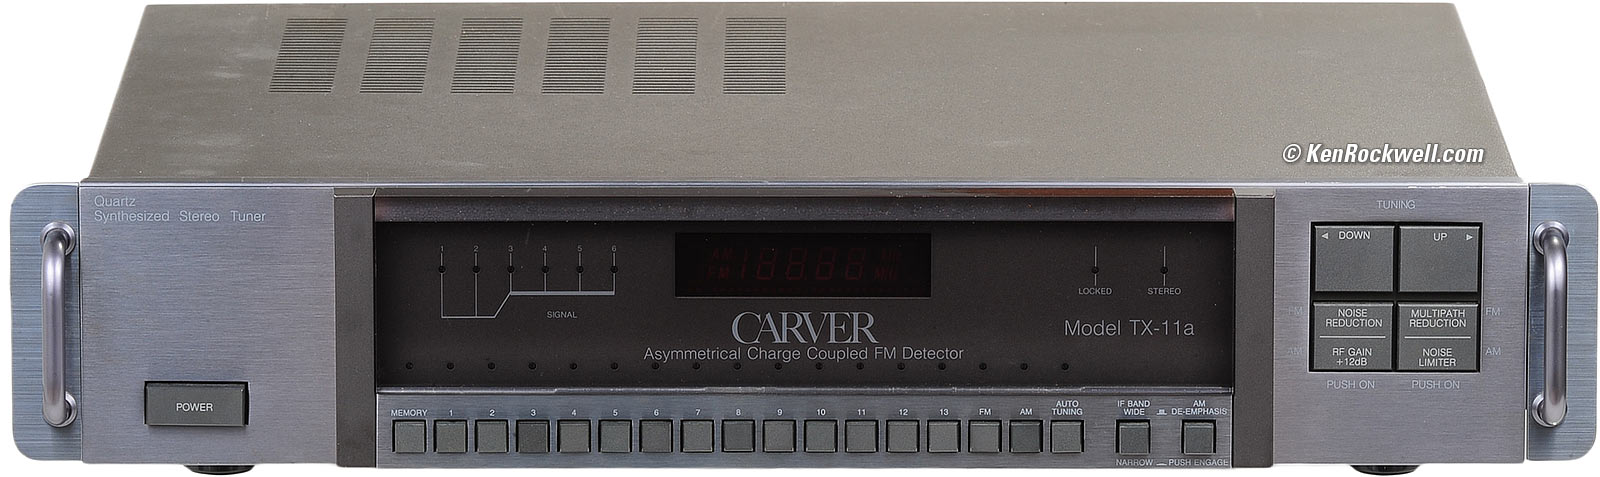 Carver TX-11a Tuner Review